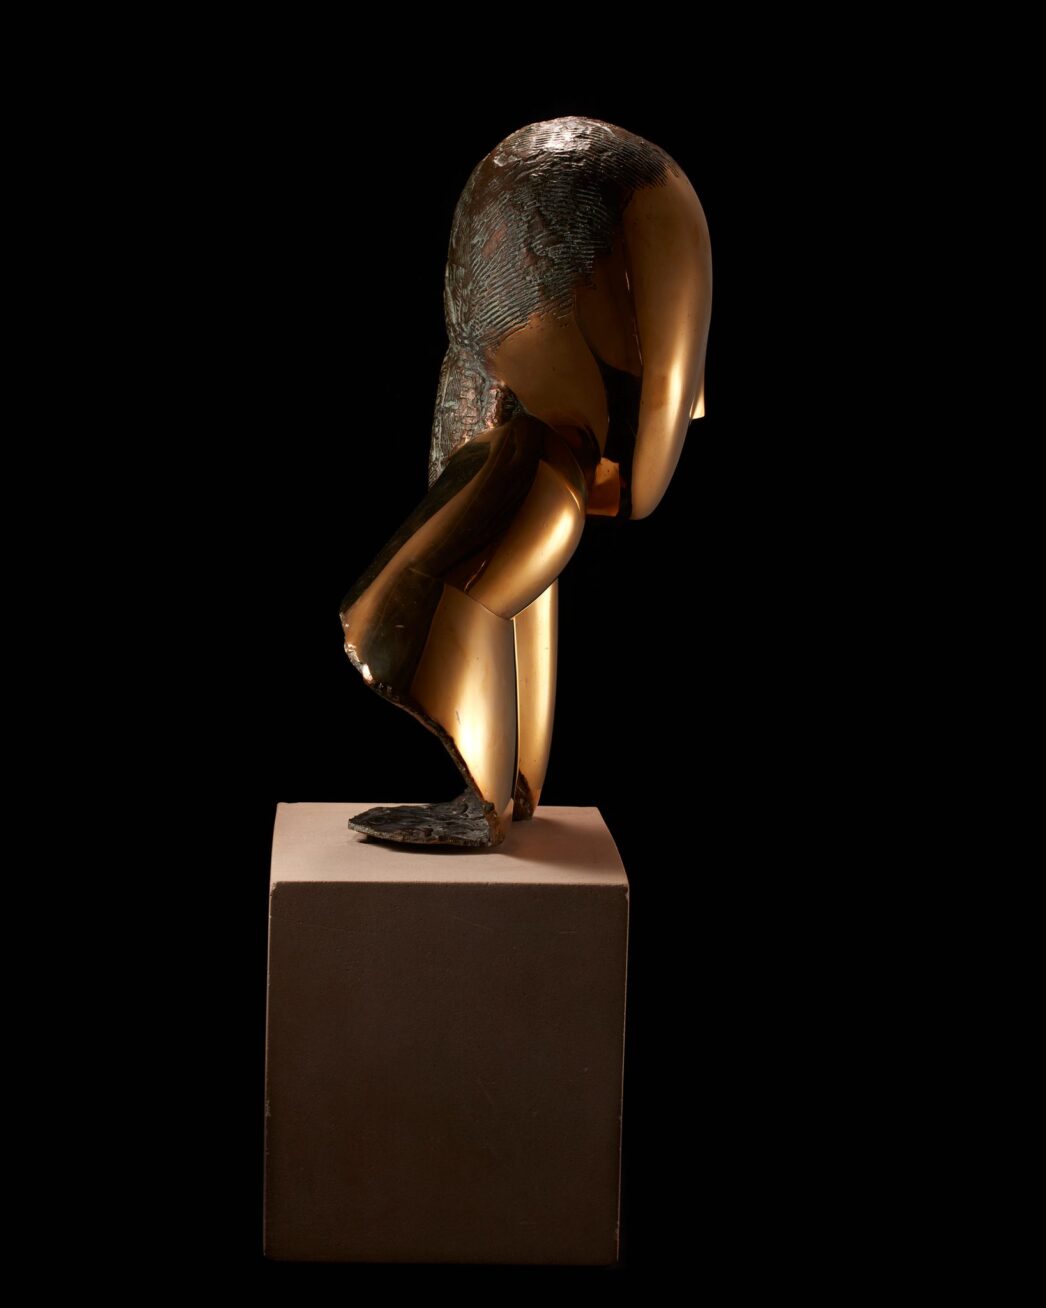 Image description: Muse, Constantin Brancusi, bronze on limestone base, 19 1/2 x 10 x 5 inches. A smooth, bronze, stylized bust of a woman’s head, elongated neck and shoulder. Front view: The woman’s egg-shaped head is smooth except for a raised V shape in the center representing the brow and finishing in a delicate nose. A small mouth is the only other feature on the face. Hair is suggested with rough, textured lines incised into the crown of the head. This texture appears darker than the glossy golden bronze face. A long neck extends from the head at left and is attached to a sloping shoulder. At right, the head seems to rest on a hand and forearm that extends to join the shoulder. The bottom edge of the sculpture has a rough and unfinished appearance. The bust rests on a gray cube of limestone that is juts a bit wider than the sculpture and about half as high. Left profile view: A smooth egg-shaped head smooth except for a small nose at the lower third of the profile. An simple C shaped ear is positioned below the textured hair. A gracefully shaped neck extends forward from a wedge-shaped shoulder. The bronze material folds back on itself, exposing rough edges, to rest on the base. Rear view: The textured hair appears to lengthen past the shoulder area ending in a blunt point. The sculpture’s shoulders fan out into a cone like structure that opens at an angle to expose the unpolished bronze inside. Right profile view: The hand and forearm shapes are visible from this view represented by simple elongated oval shape, a crease at the wrist giving definition to the two parts.